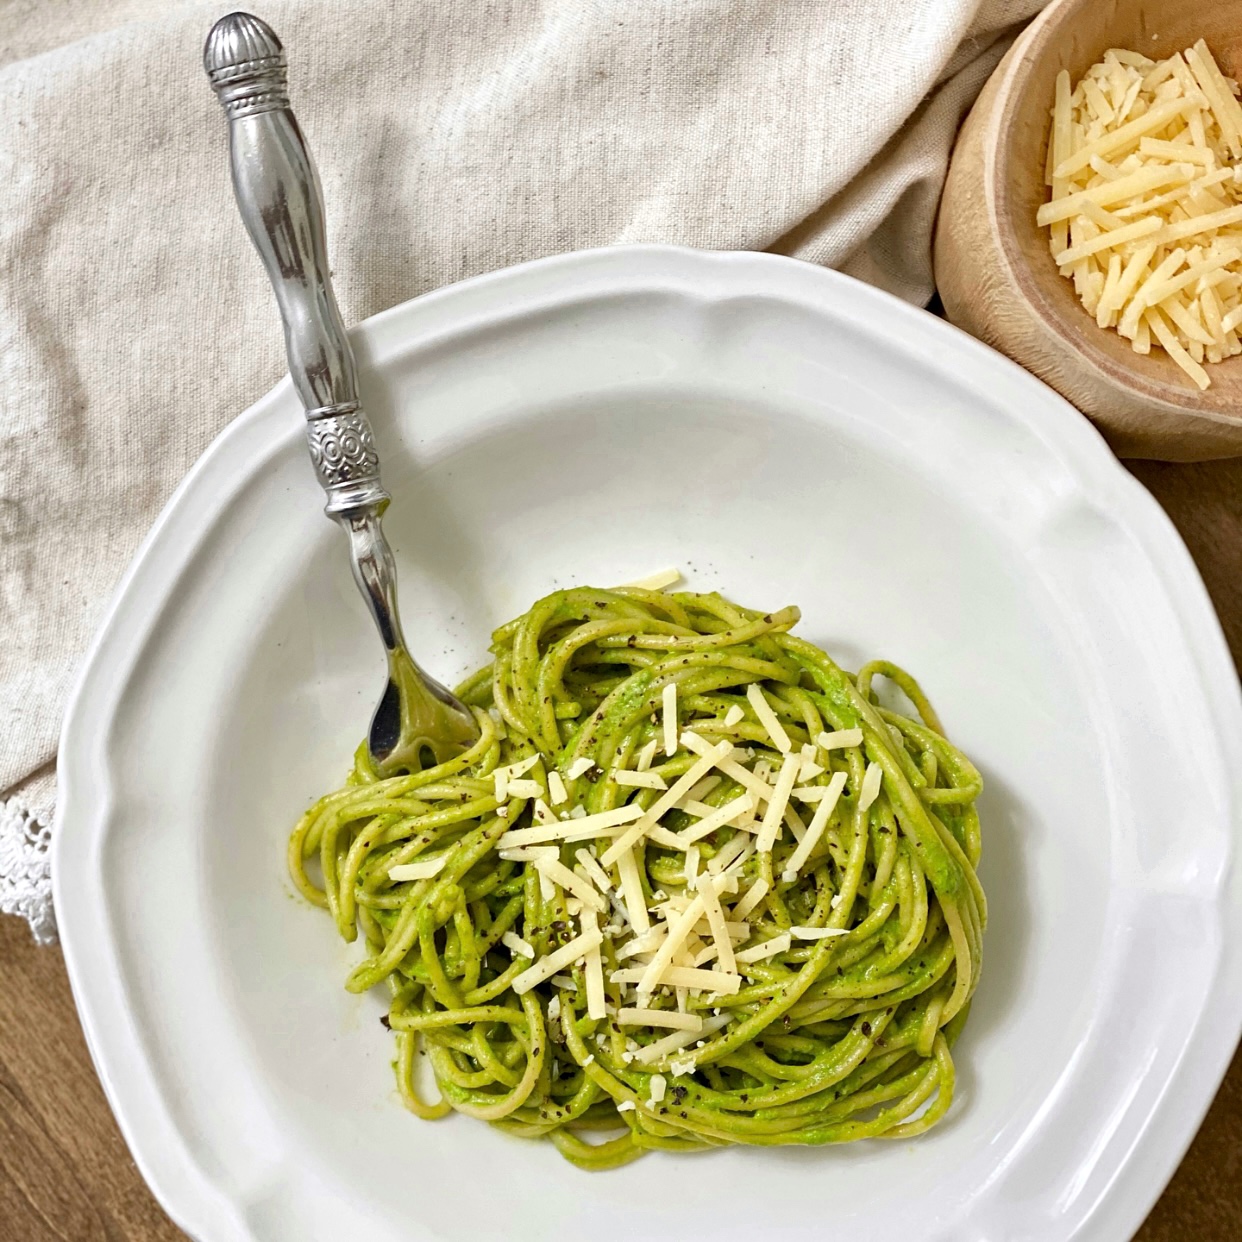 Delicious kale pesto on whole wheat spaghetti pasta with parmesan cheese and fresh cracked pepper on top served in a white pasta bowl.